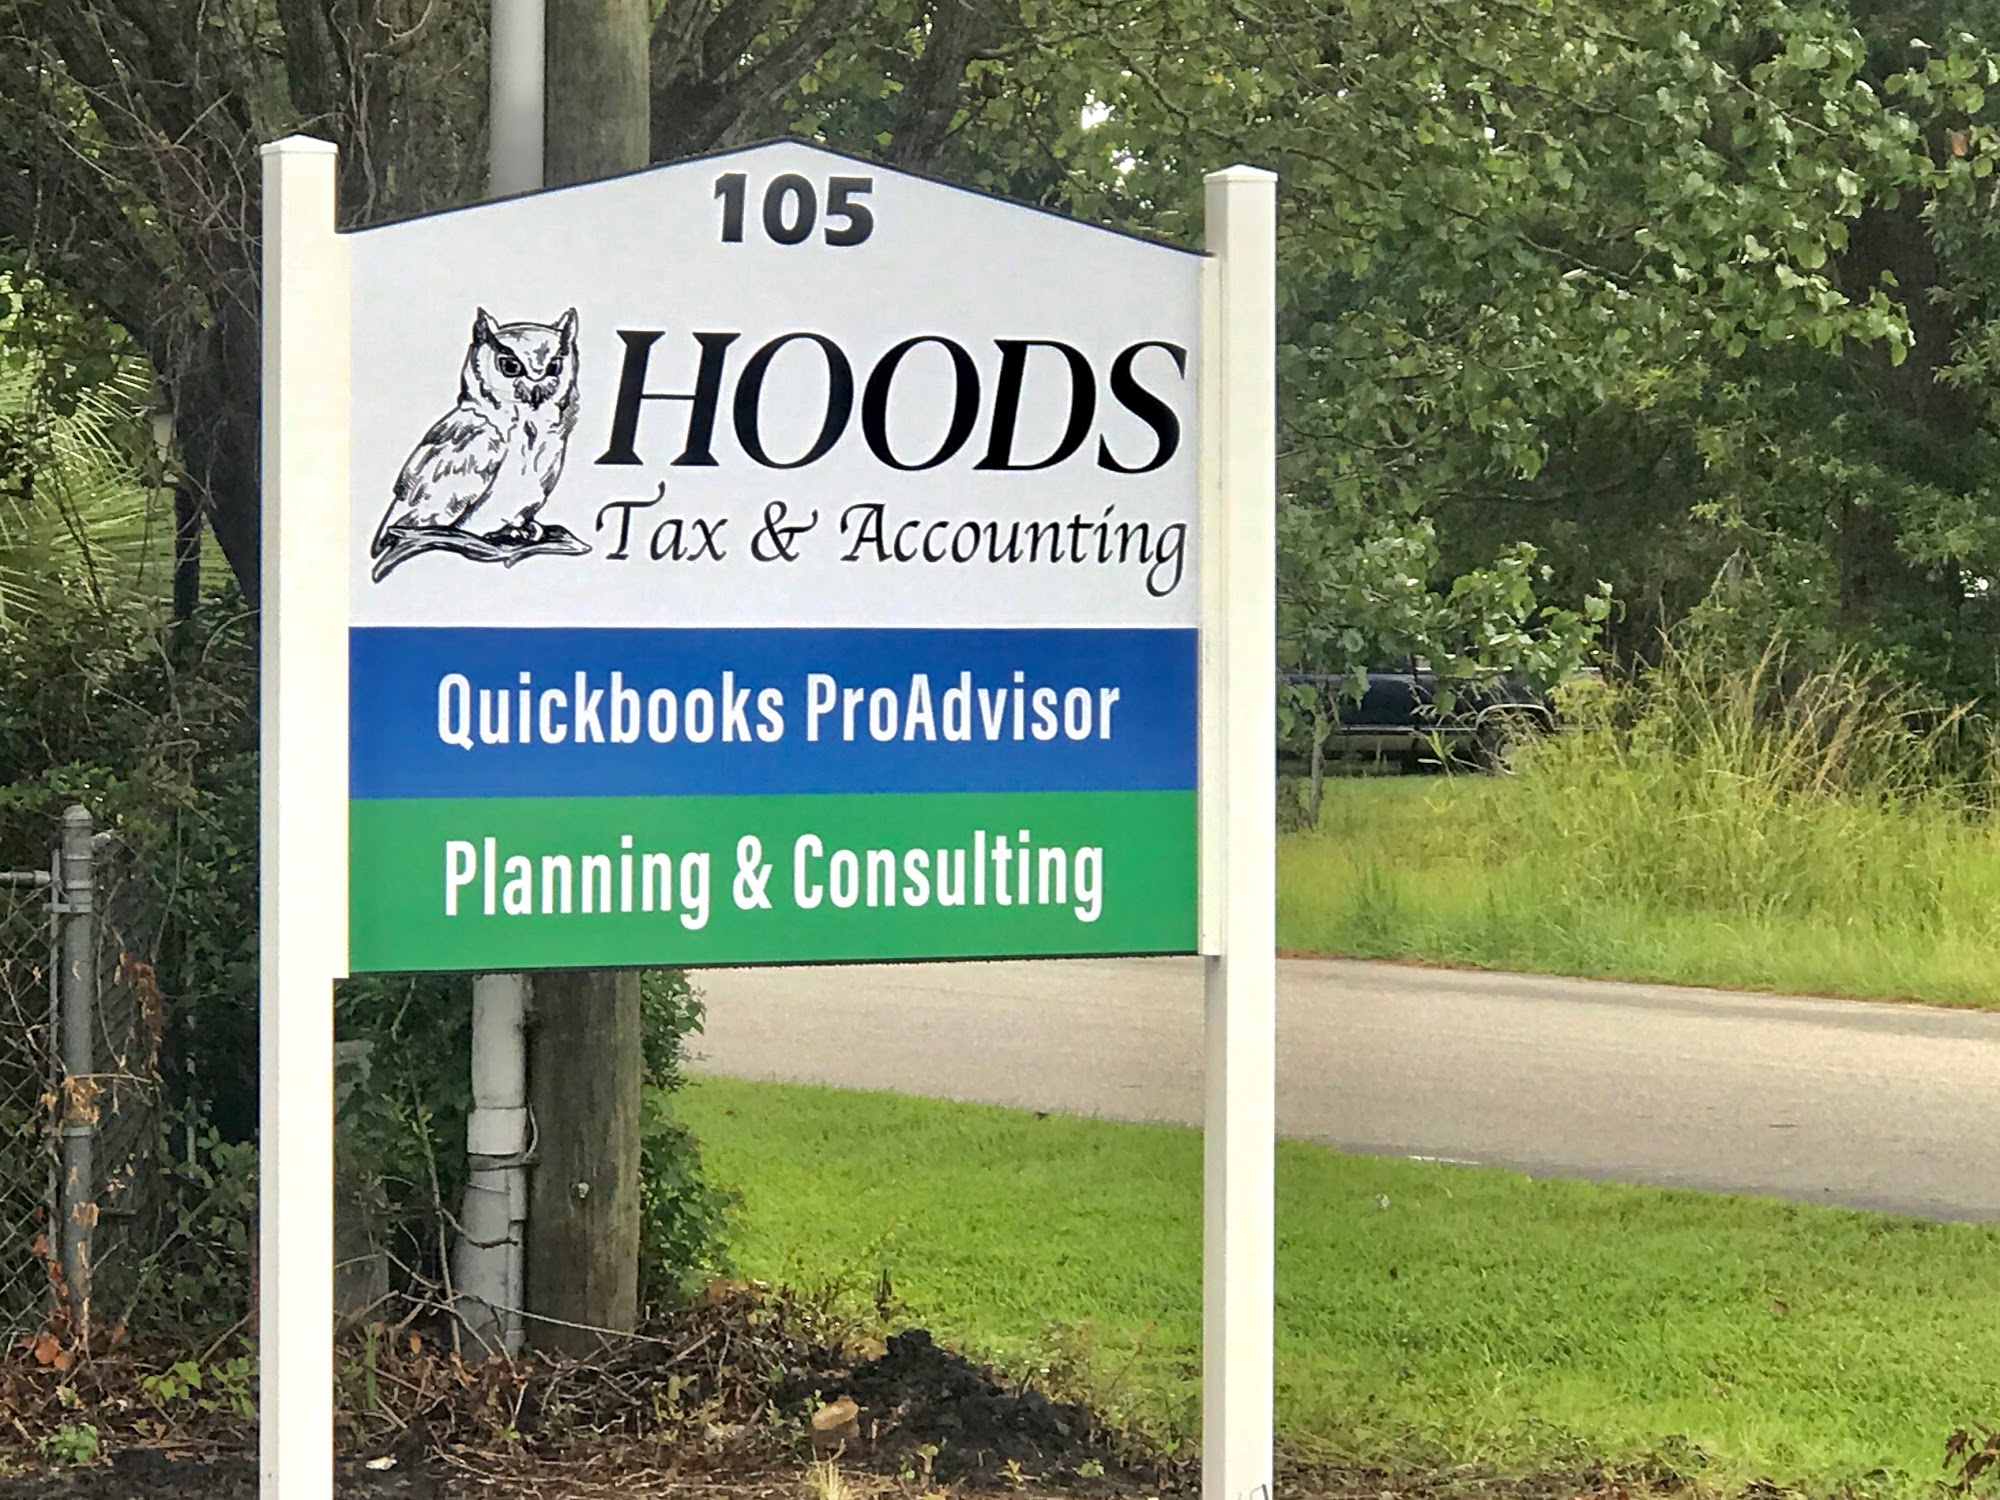 Hood's Tax and Accounting Service